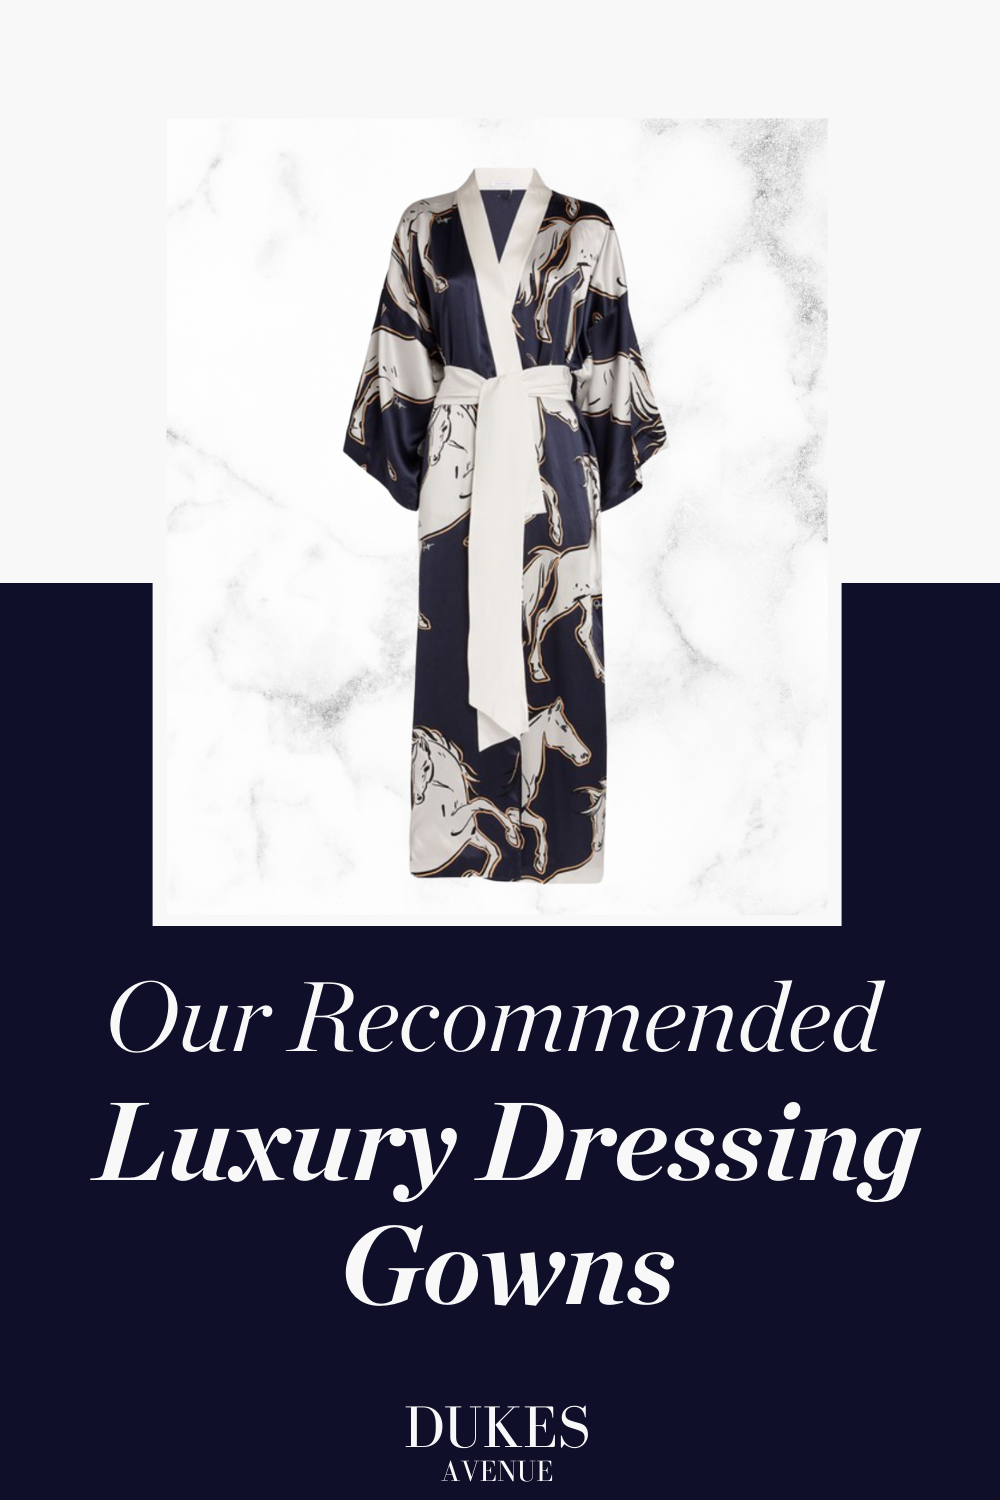 Navy silk dressing gown against a marble background with text overlay 'our recommended luxury dressing gowns'